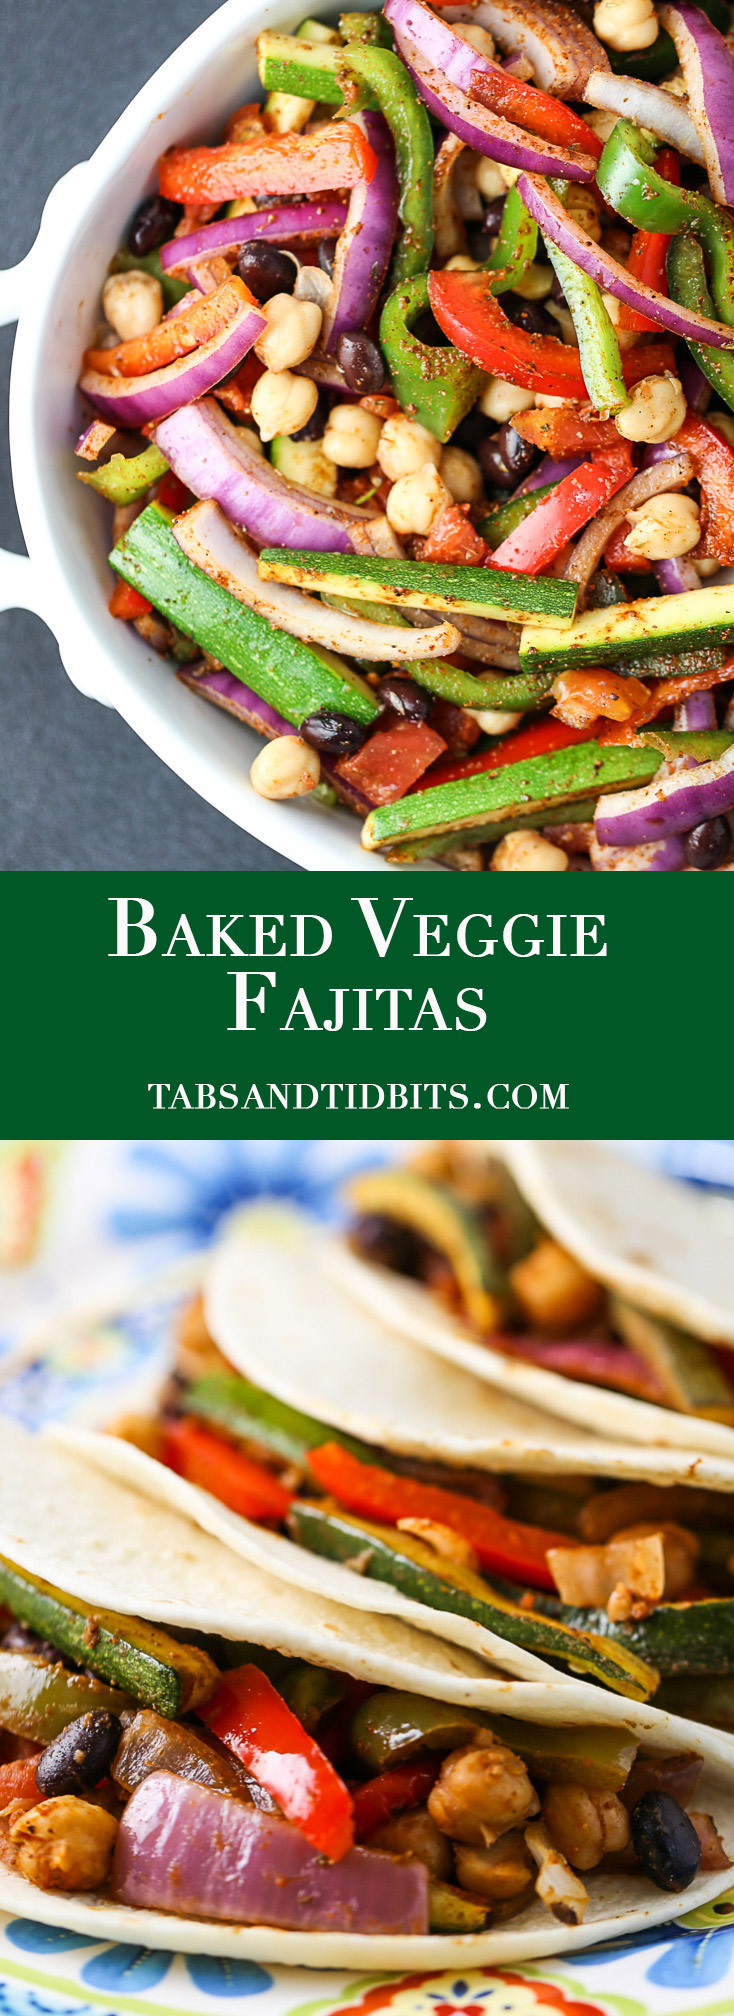 Baked Veggie Fajitas - These veggie-filled fajitas are baked for ease and filled with protein-packed beans to round out this spicy and tasty dish!